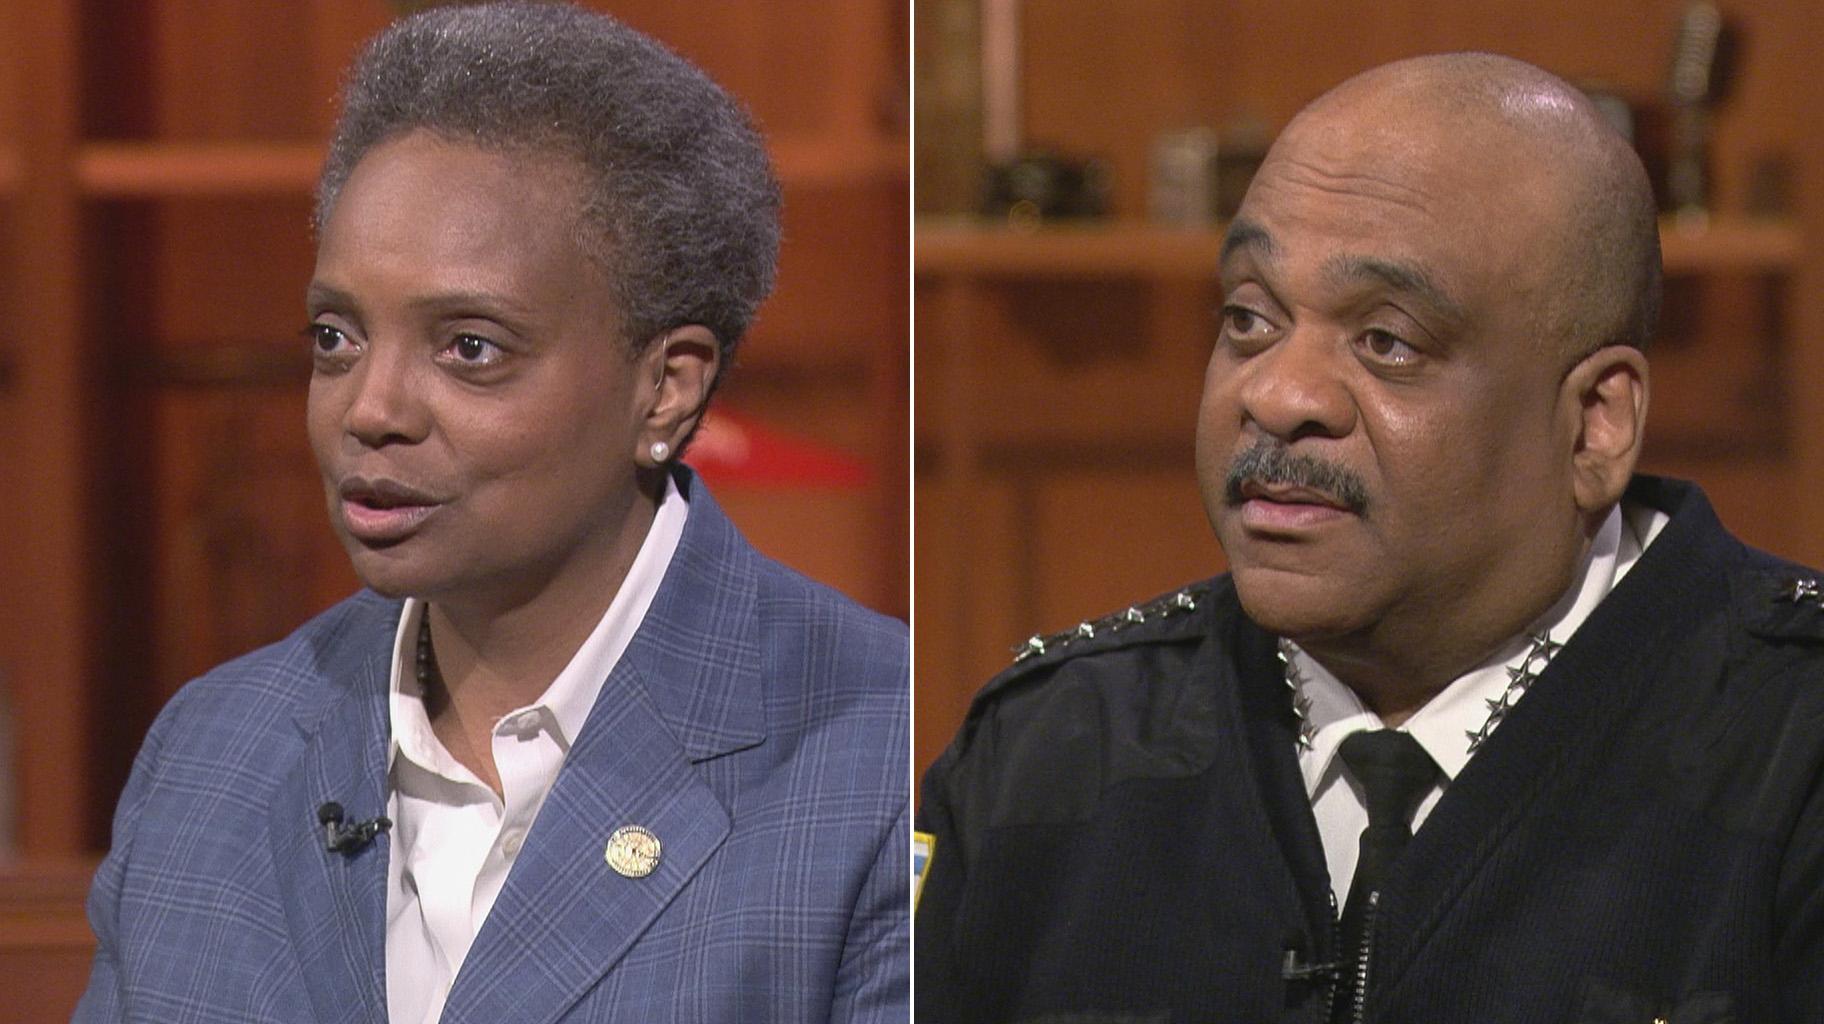 Mayor Lori Lightfoot and Chicago Police Superintendent Eddie Johnson on “Chicago Tonight” during separate appearances in 2019. (WTTW News)